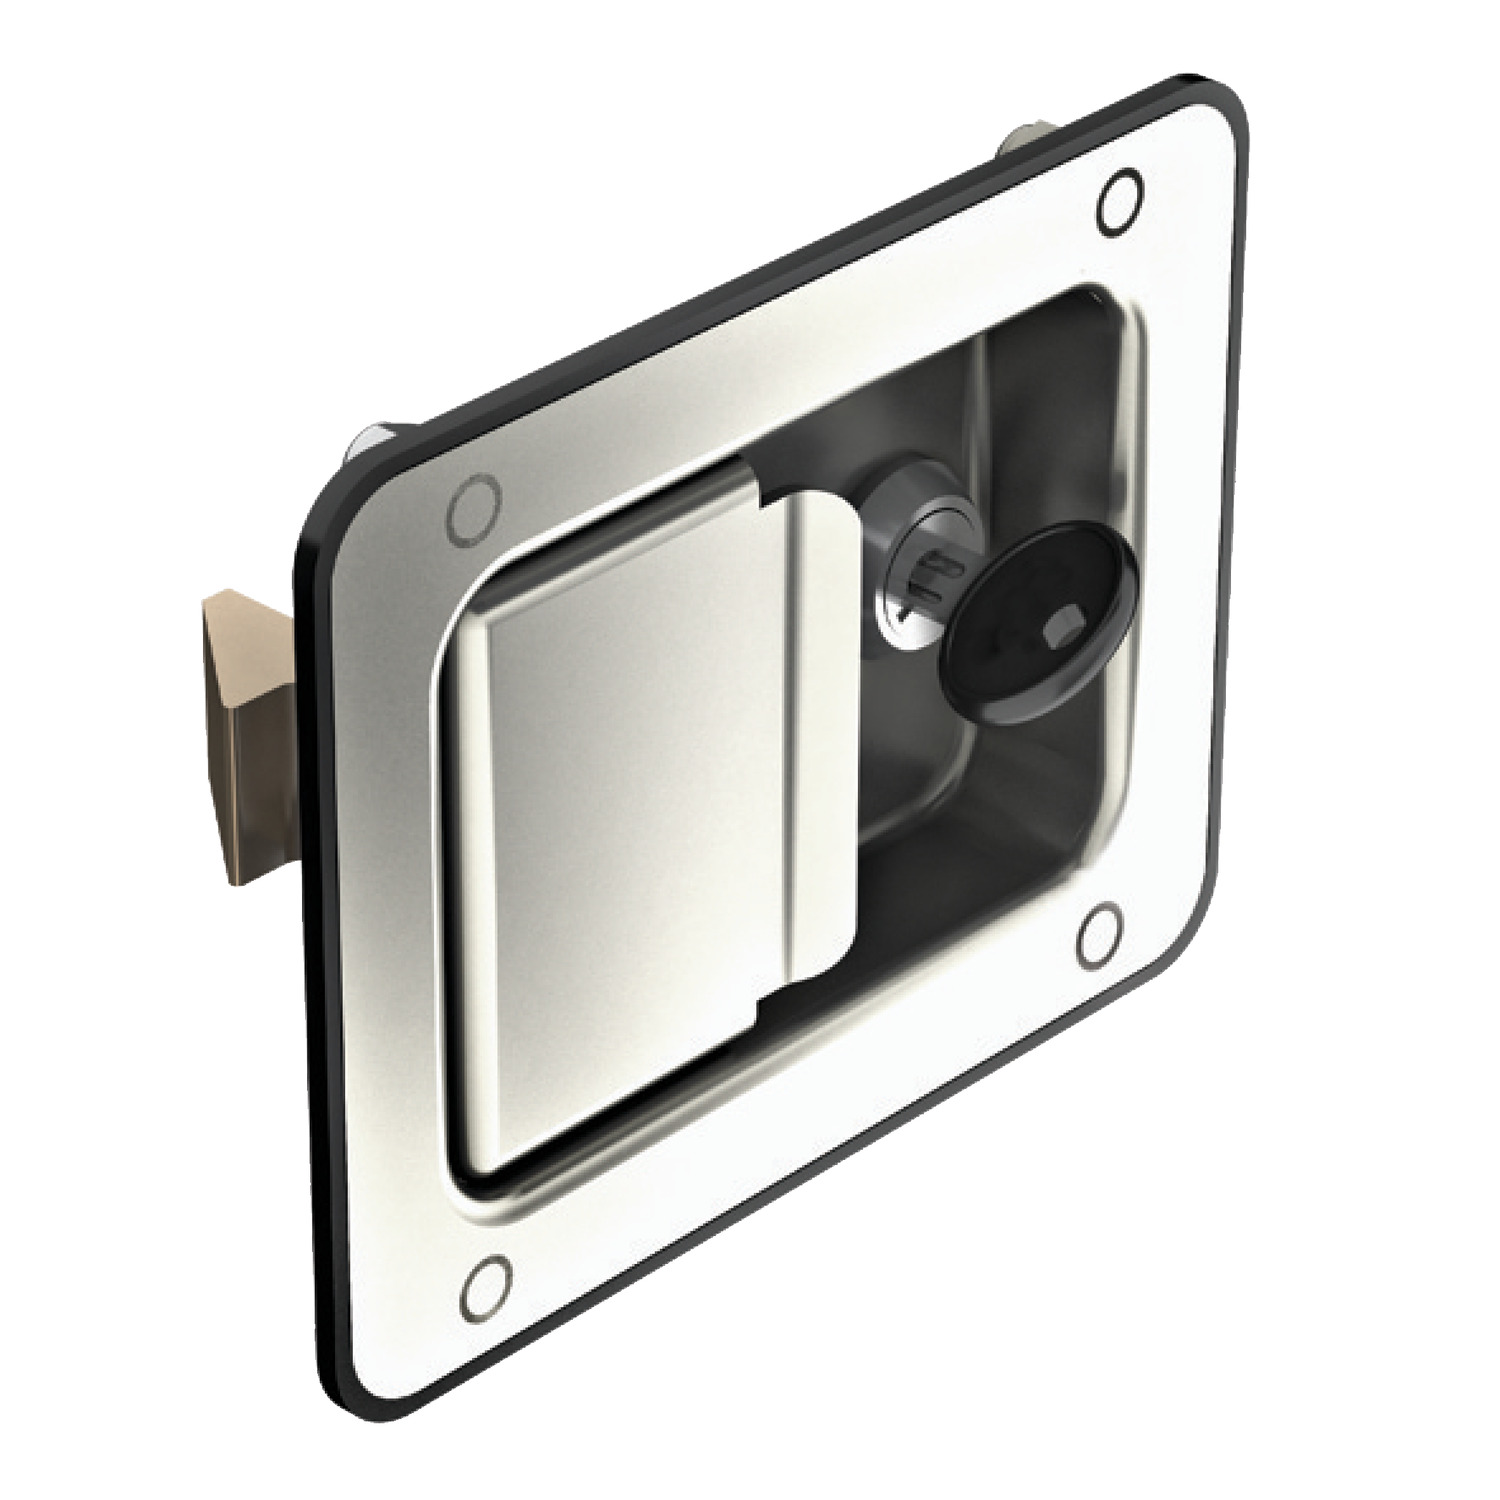 Product B4750, Push To Close Paddle Latches pull to open - slam action -standard cylinder lock - stainless / 